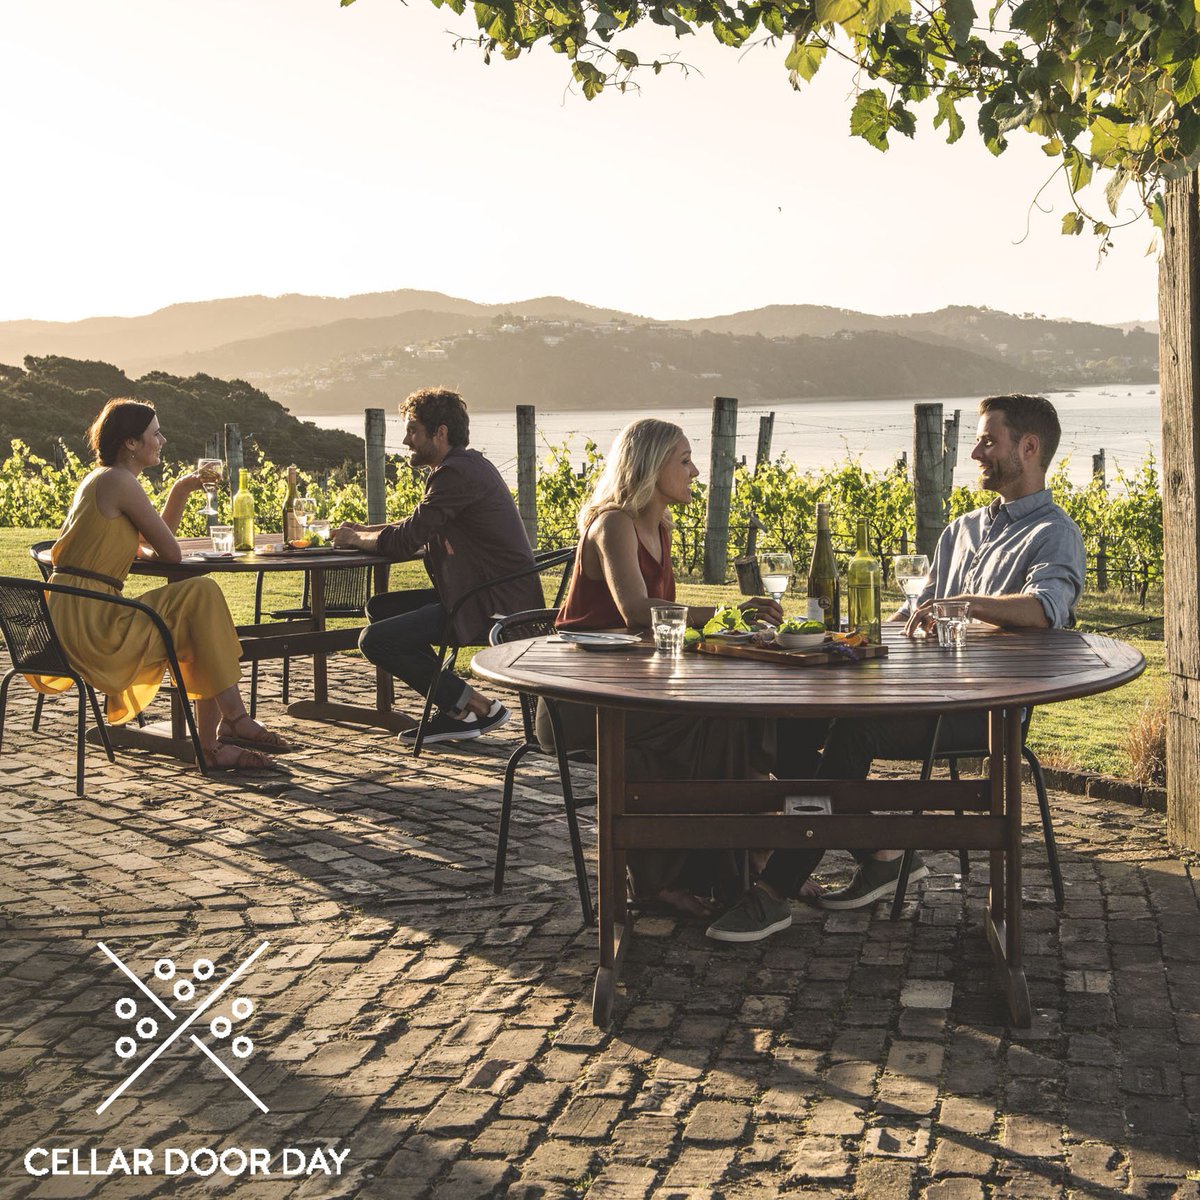 Celebrate #cellardoorday with us on the 17th of November! Want to try a local winery's restaurant or use it as an excuse to catch up with friends? We have 250 cellar doors across the country - find out what's happening near you: nzwine.com/visit #nzwine